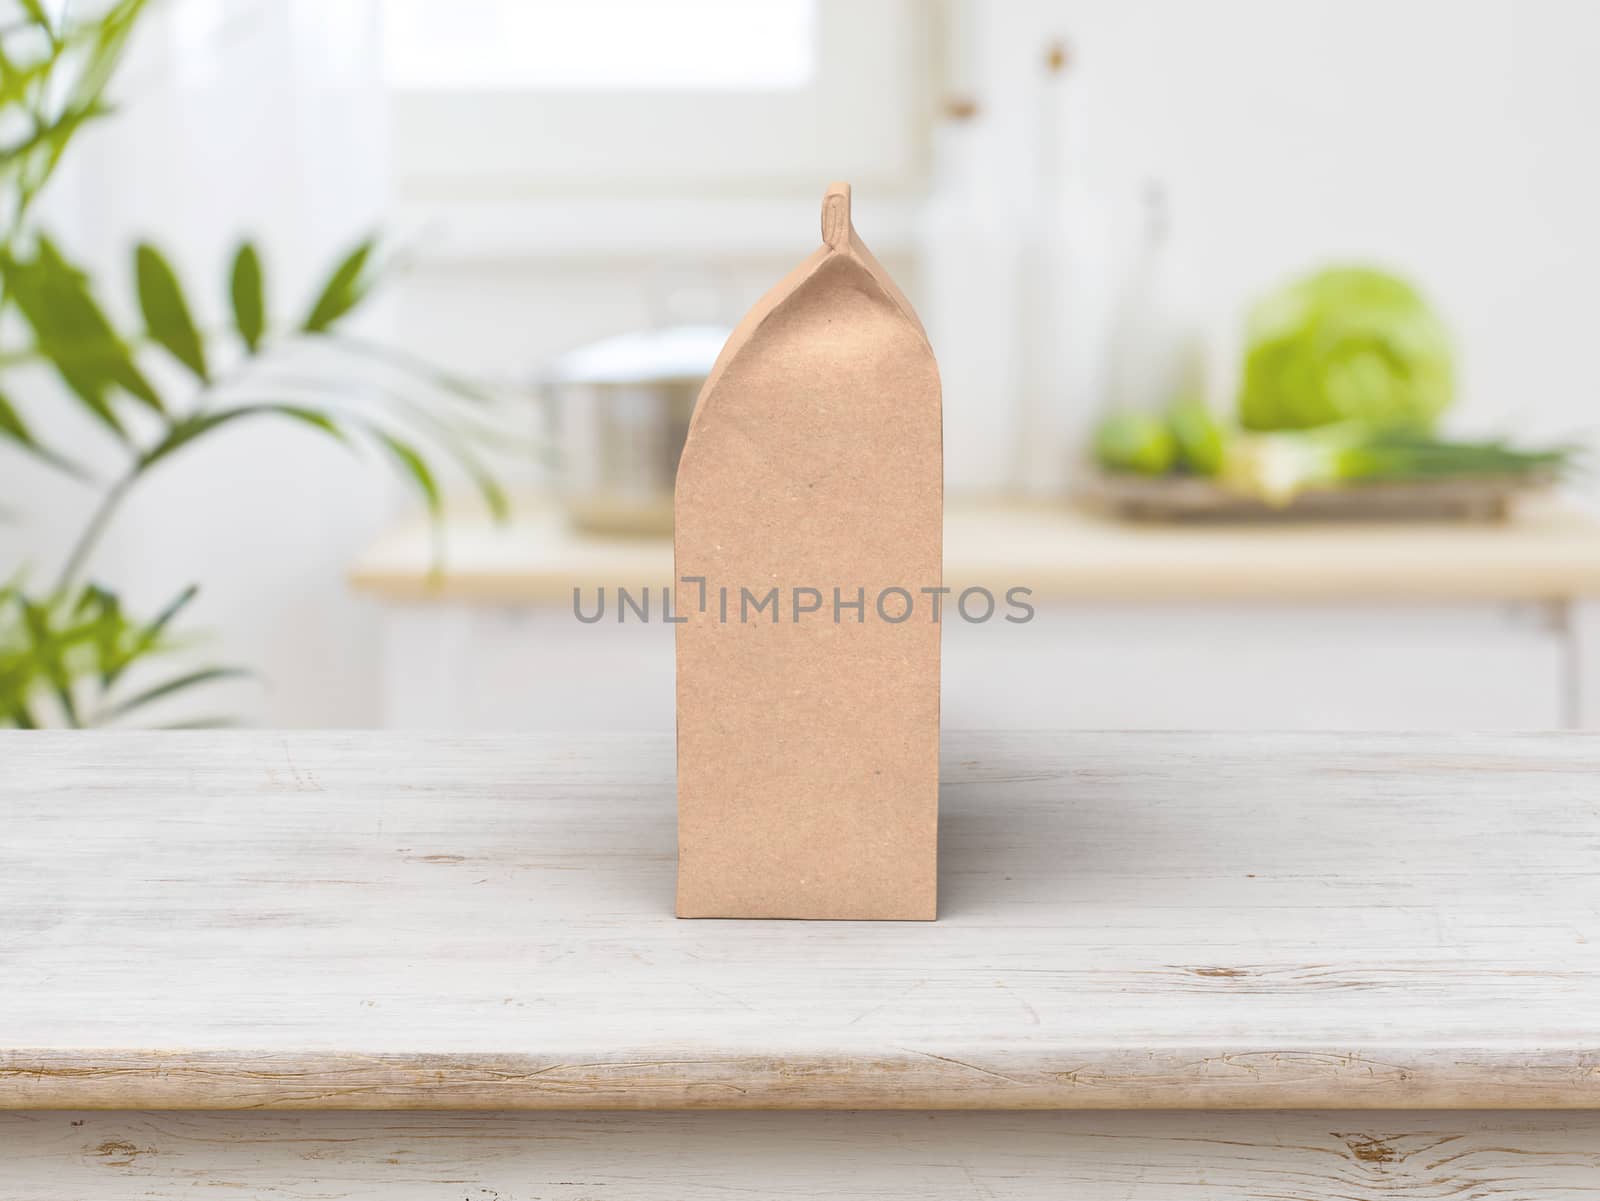 The coffee beam bag packaging mock-up design side view on wooden by cougarsan